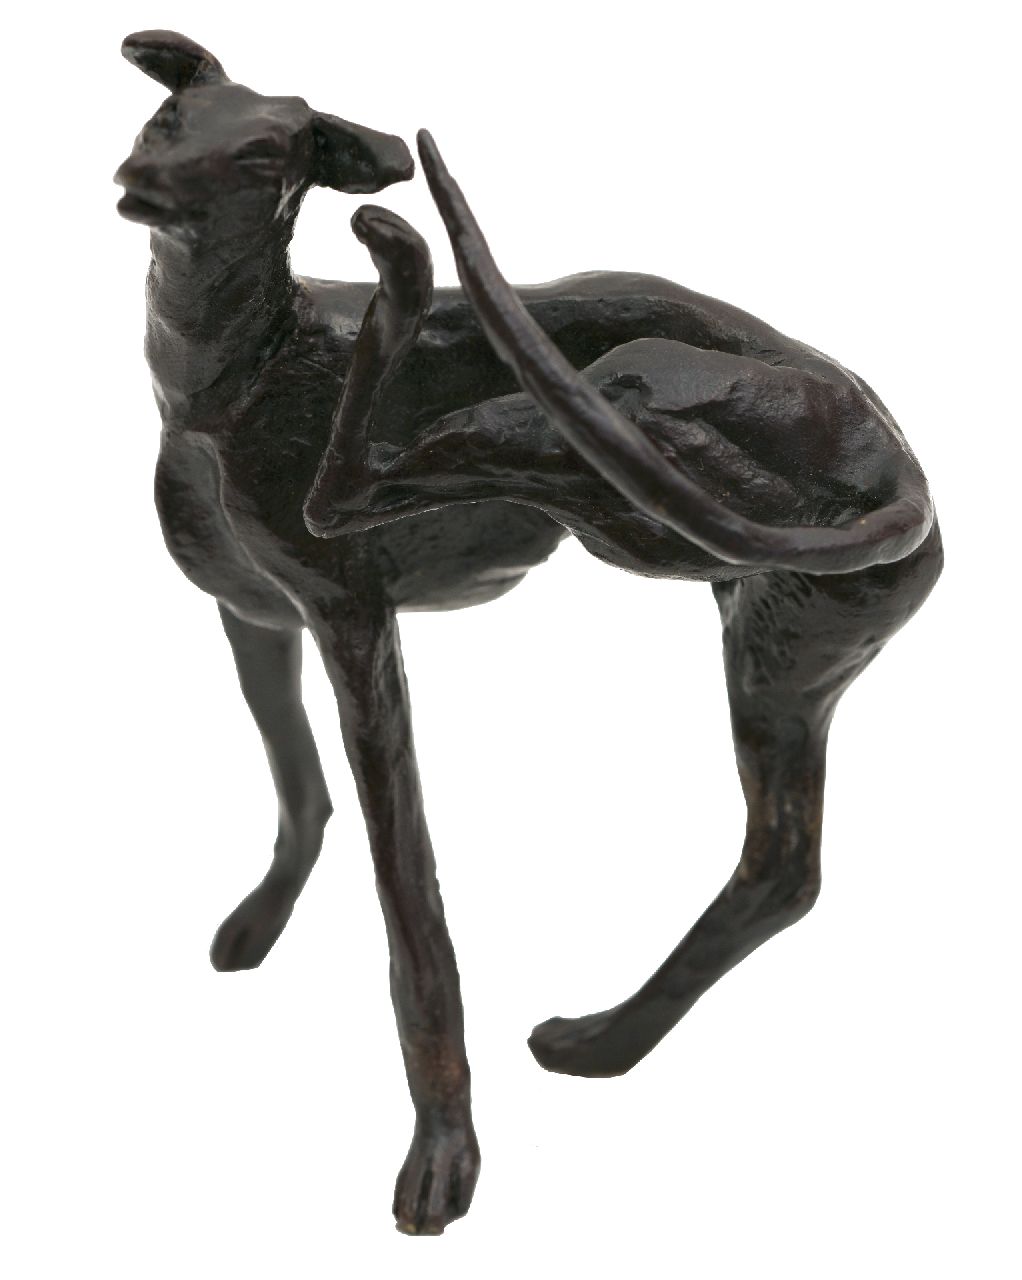 Glen H.  | Harriet Glen | Sculptures and objects offered for sale | Greyhound, bronze 10.3 x 8.0 cm, signed on right back leg